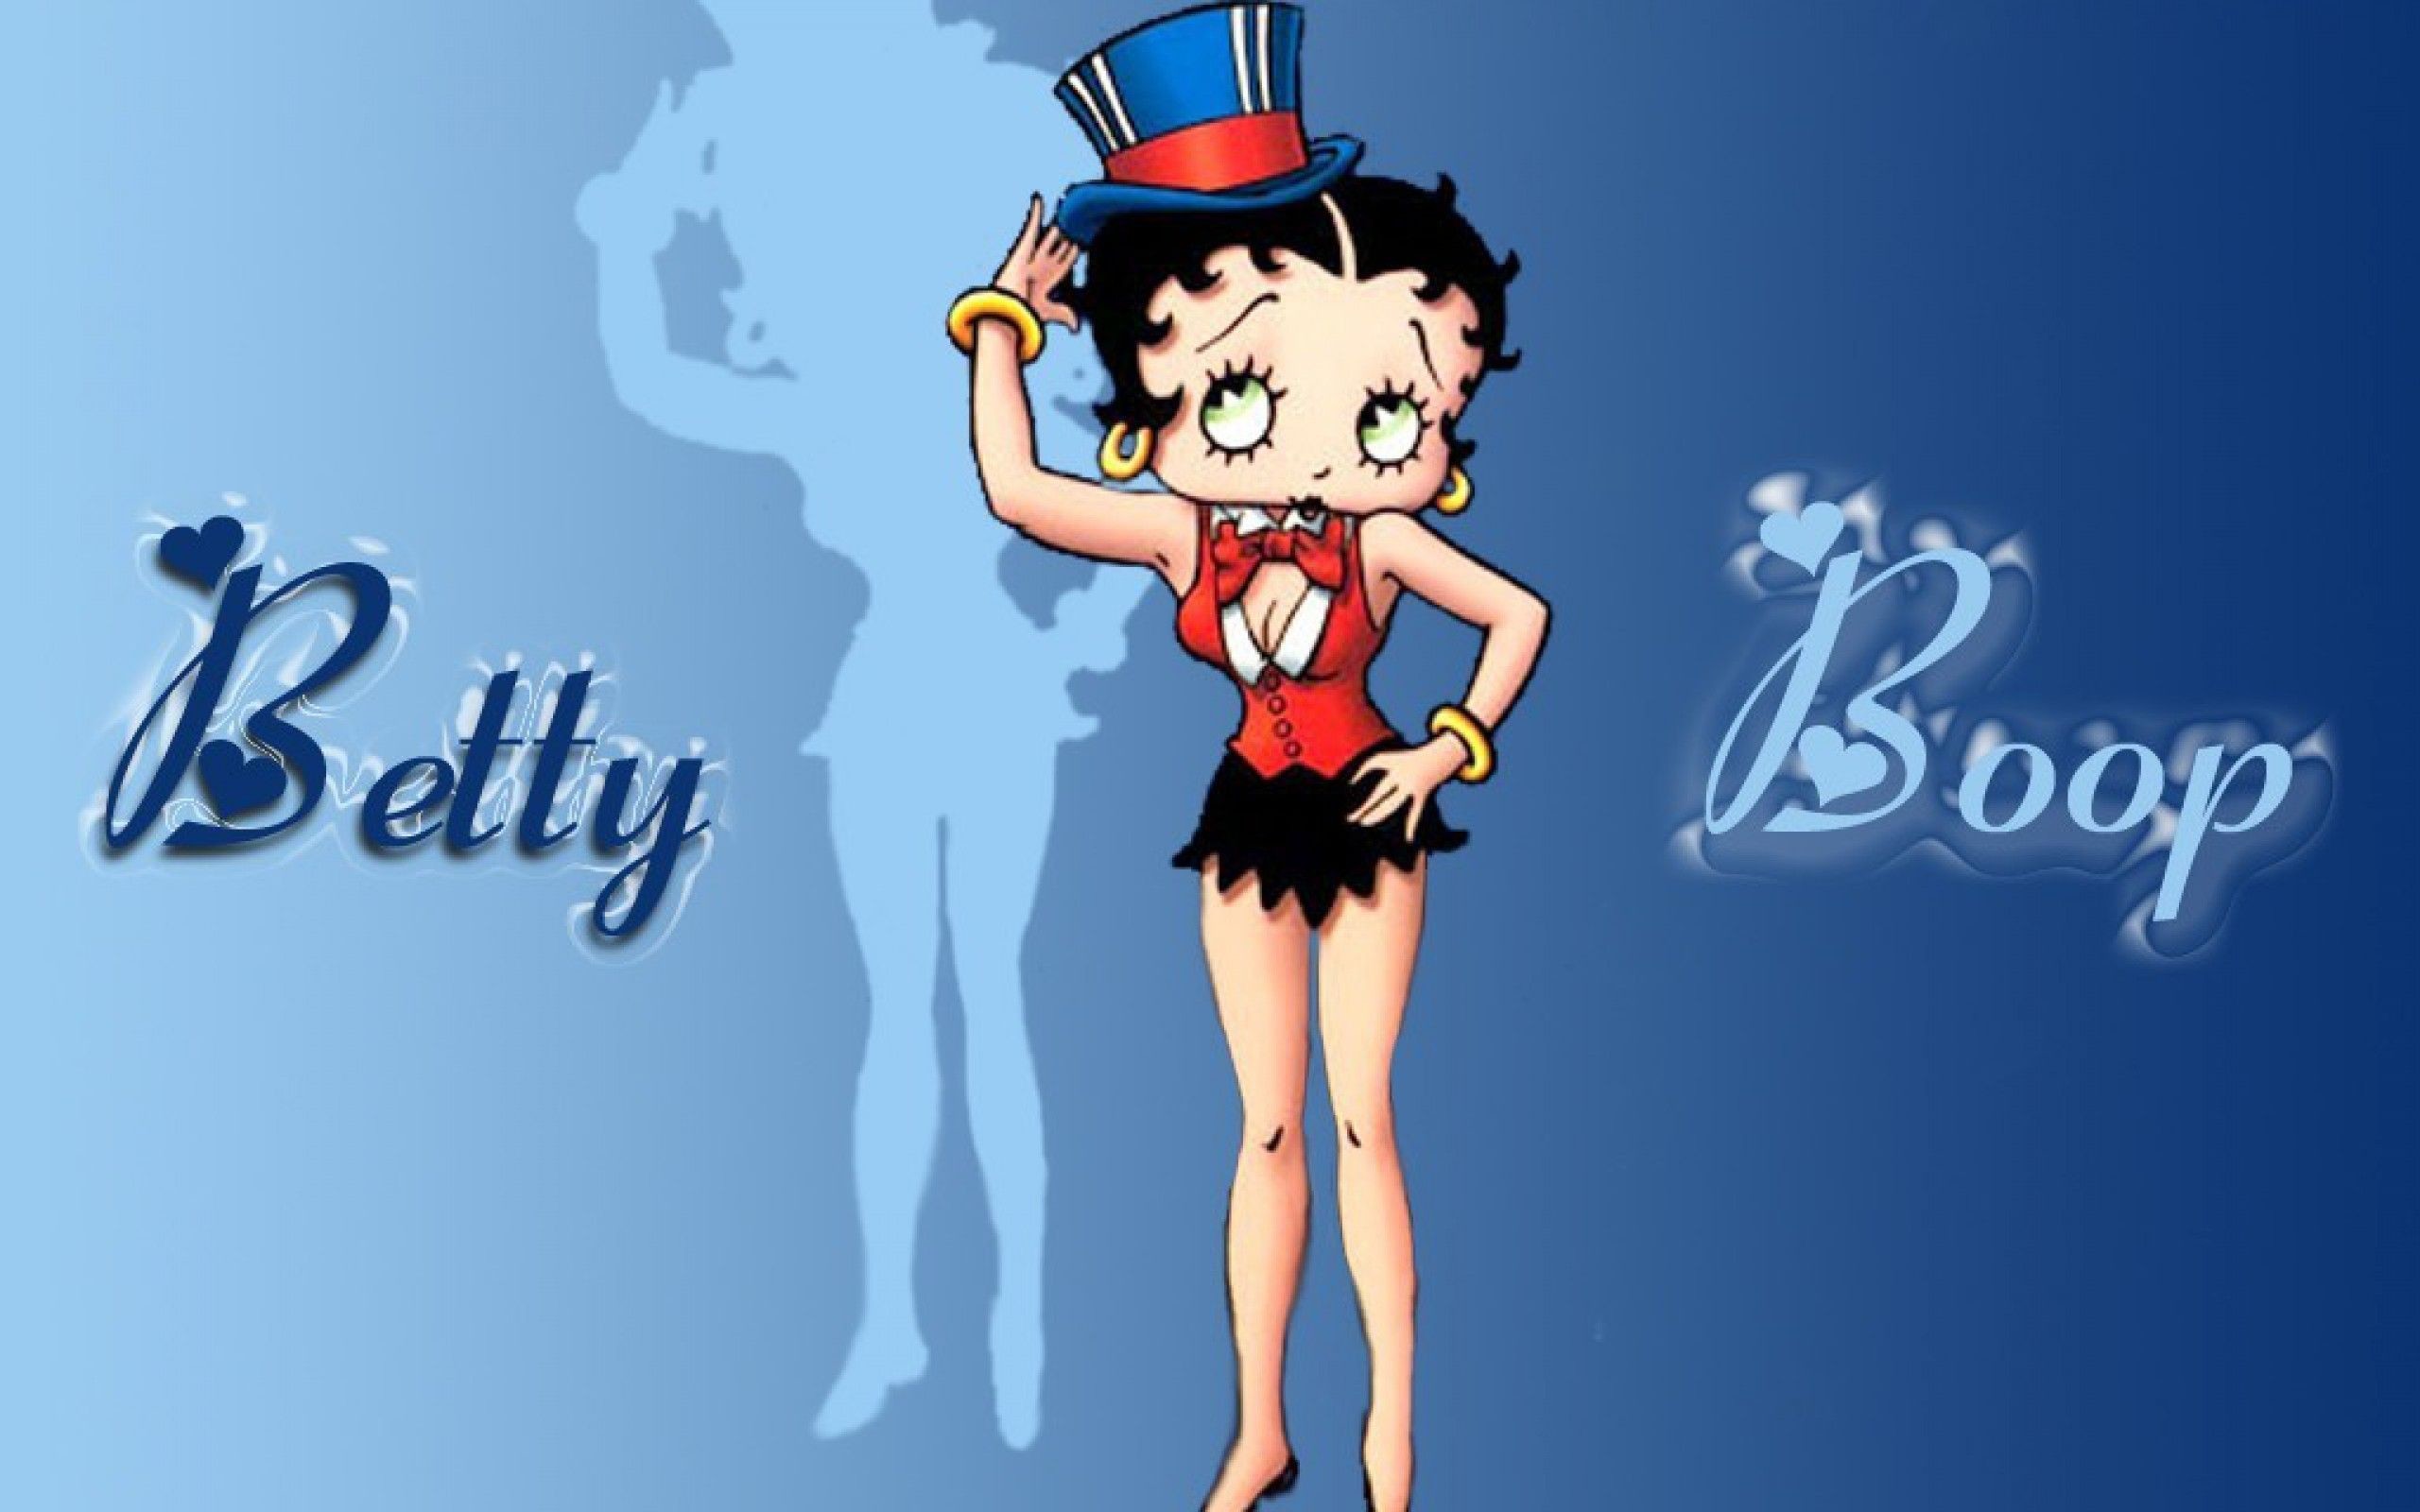 2560x1600 Betty Boop Wallpaper Collection For Free Download | HD Wallpapers .